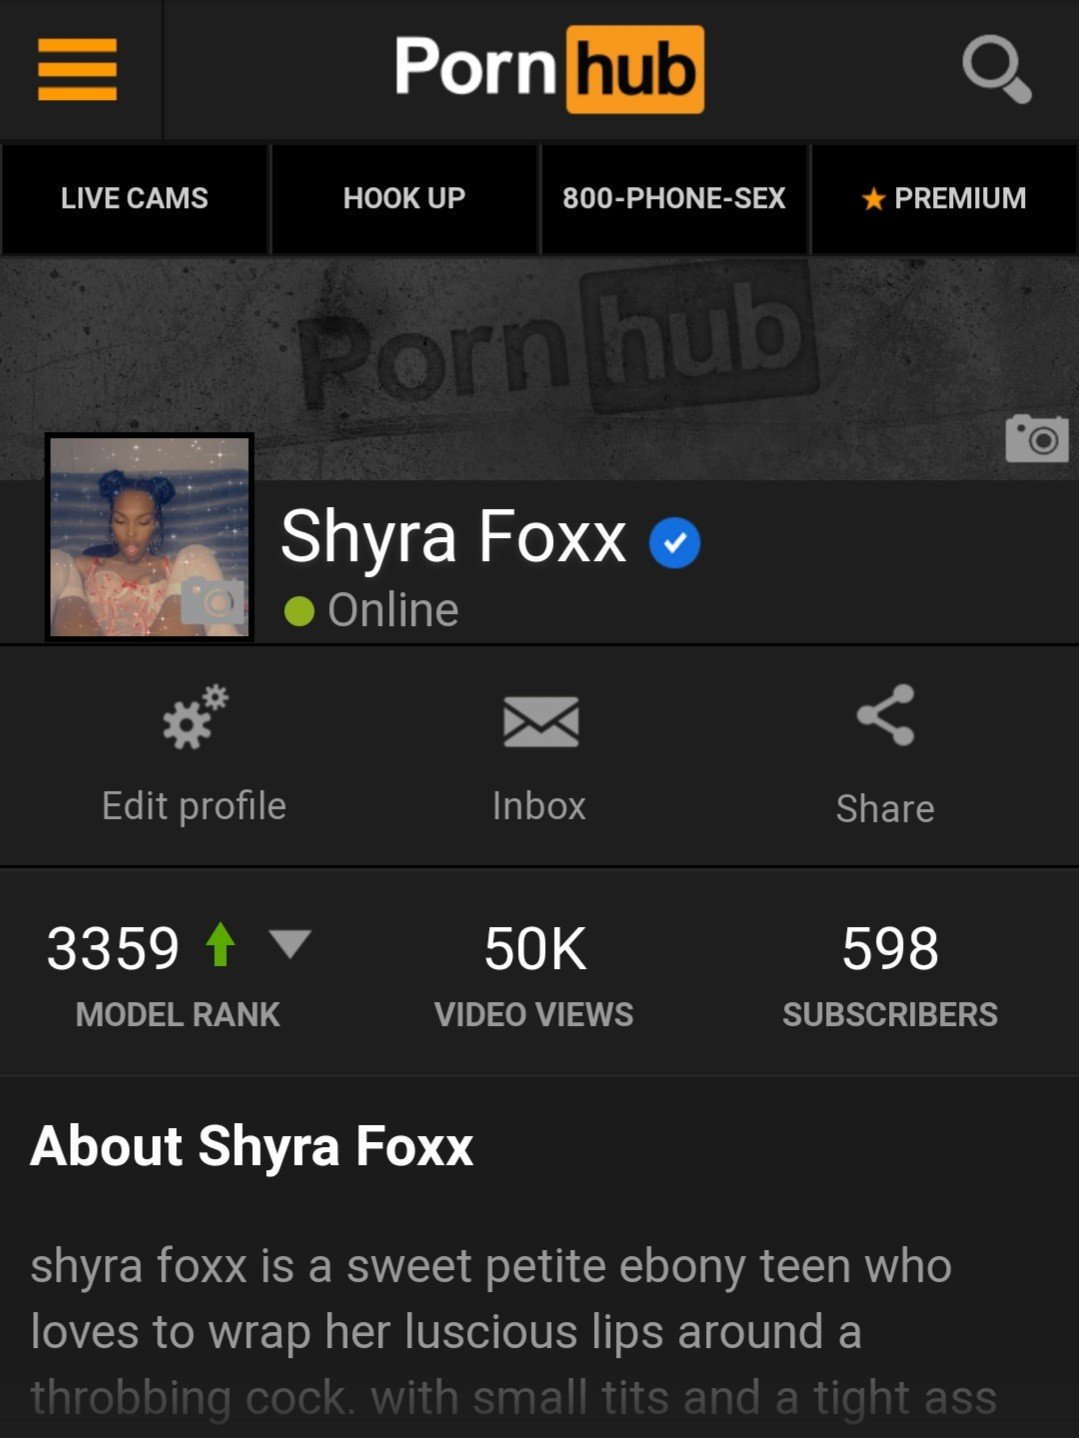 Photo by Shyra Foxx with the username @ShyraFoxx, who is a star user,  June 5, 2020 at 1:57 AM. The post is about the topic Teen and the text says 'We hit 50k babes!!! Thank you soooo much😍😍. 
Now let's get 💯k!!!
Cum subscribe to my page and leave me a comment on your favorite 
https://www.pornhub.com/model/shyra-foxx/subscribers'